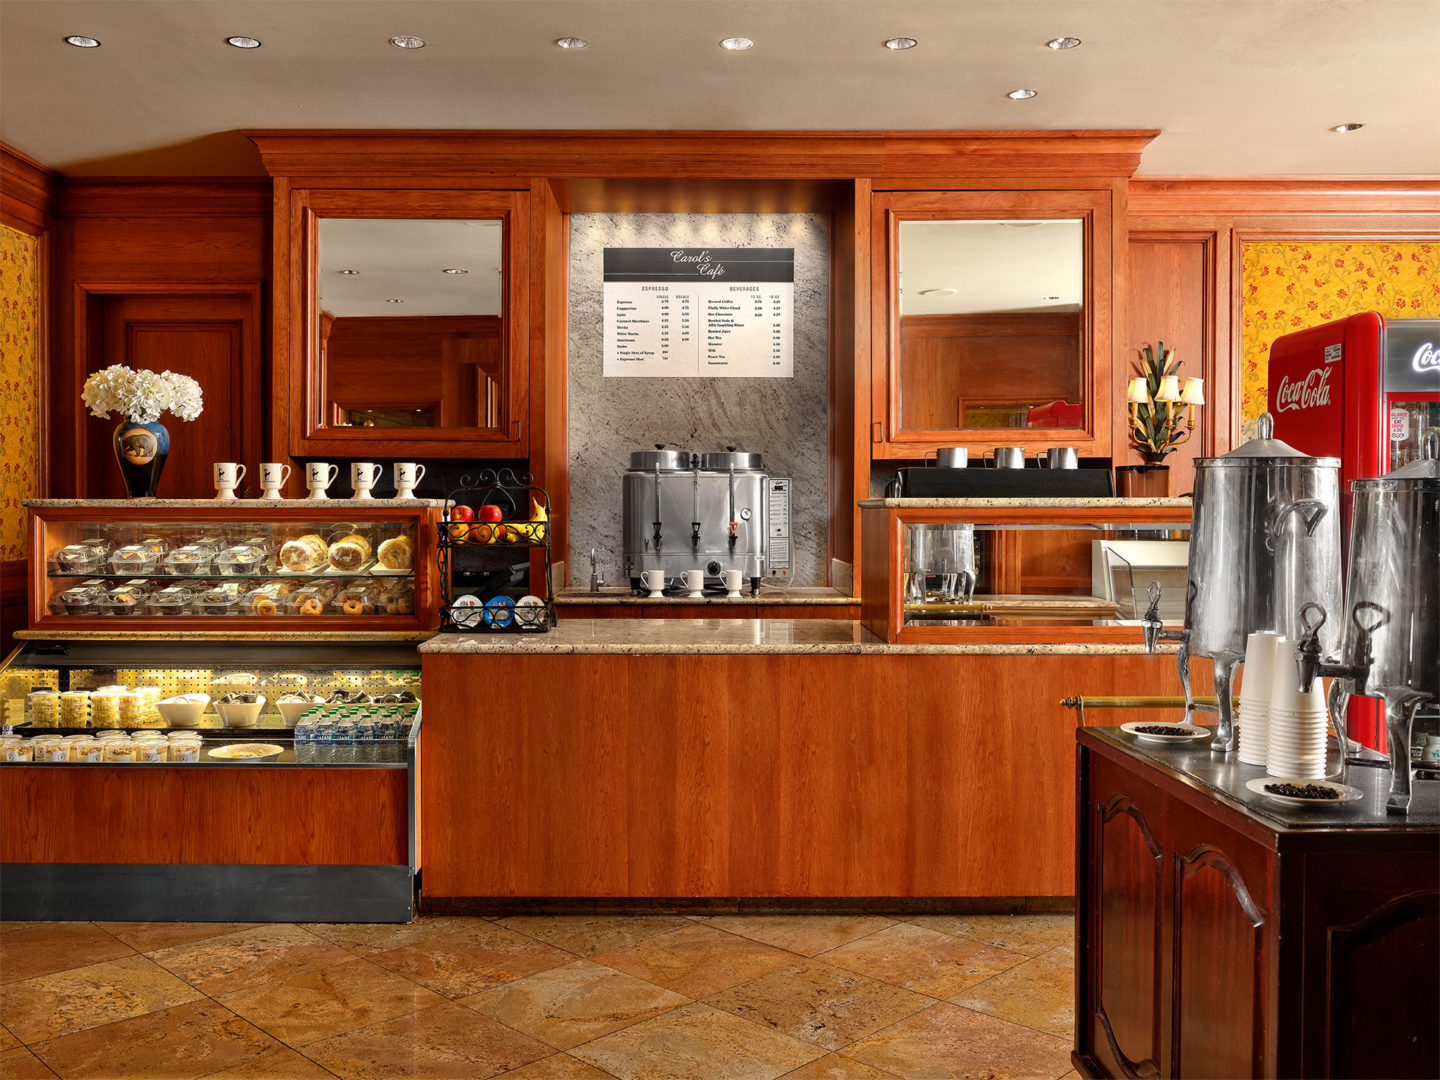 Carol's Cafe with a pastry display, espresso and coffee makers and counter for guests to buy foo and drinks.